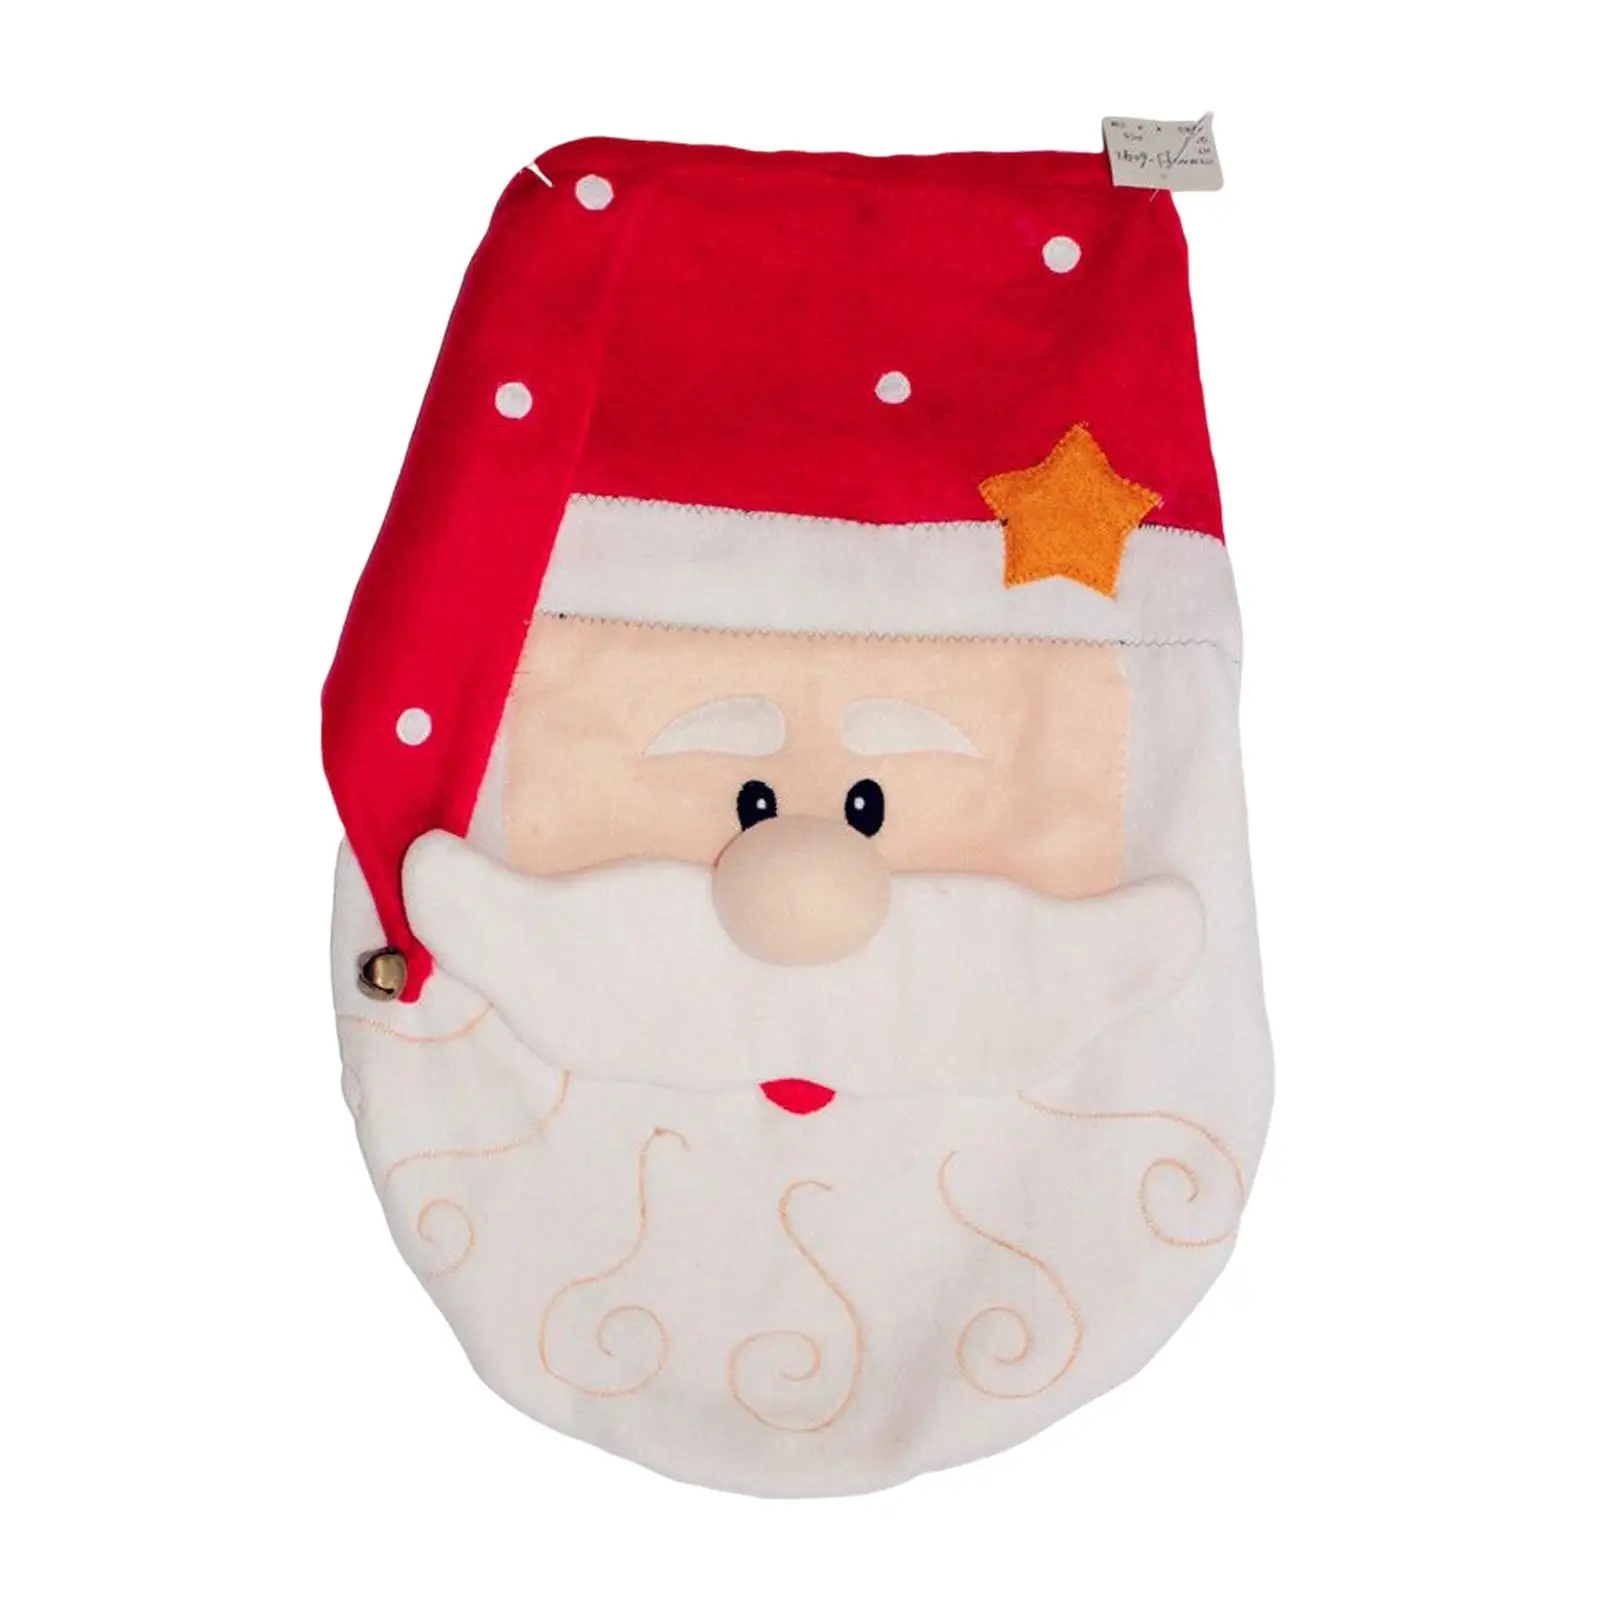 Cute Toilet Seat Cover Christmas Ornament Supplies Red Lid Cover Mat for